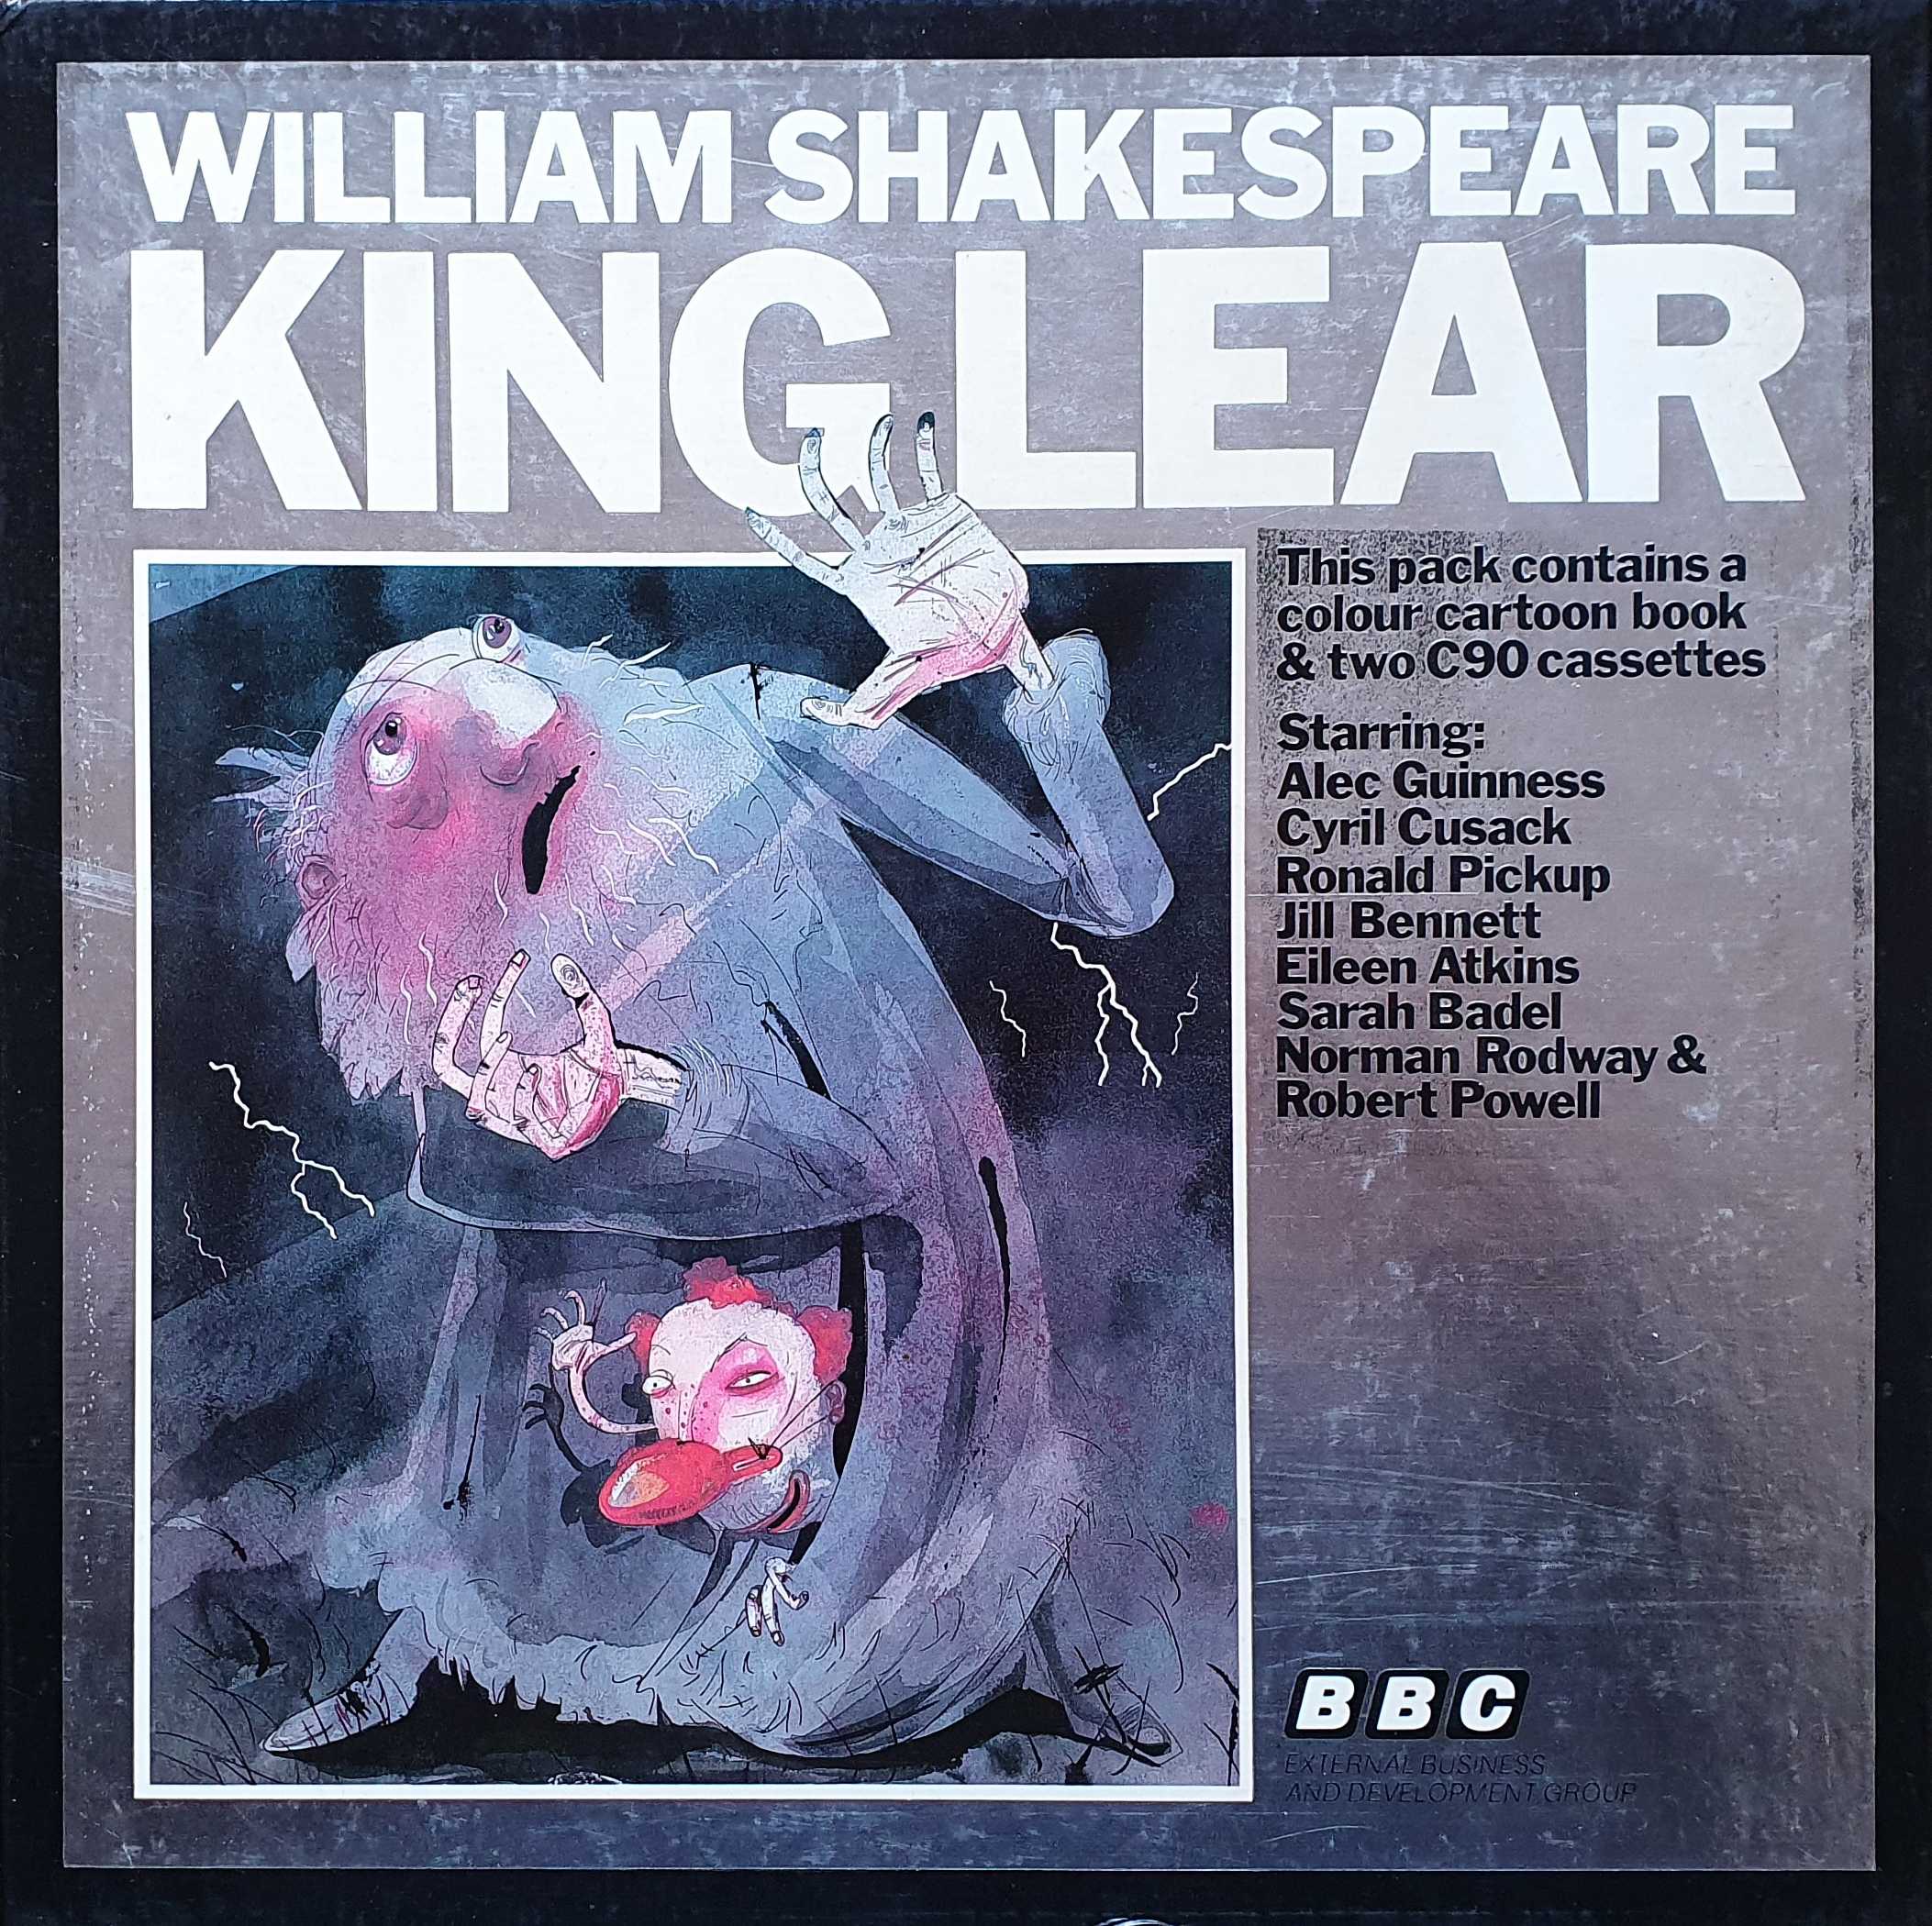 Picture of King Lear by artist William Shakespeare from the BBC cassettes - Records and Tapes library